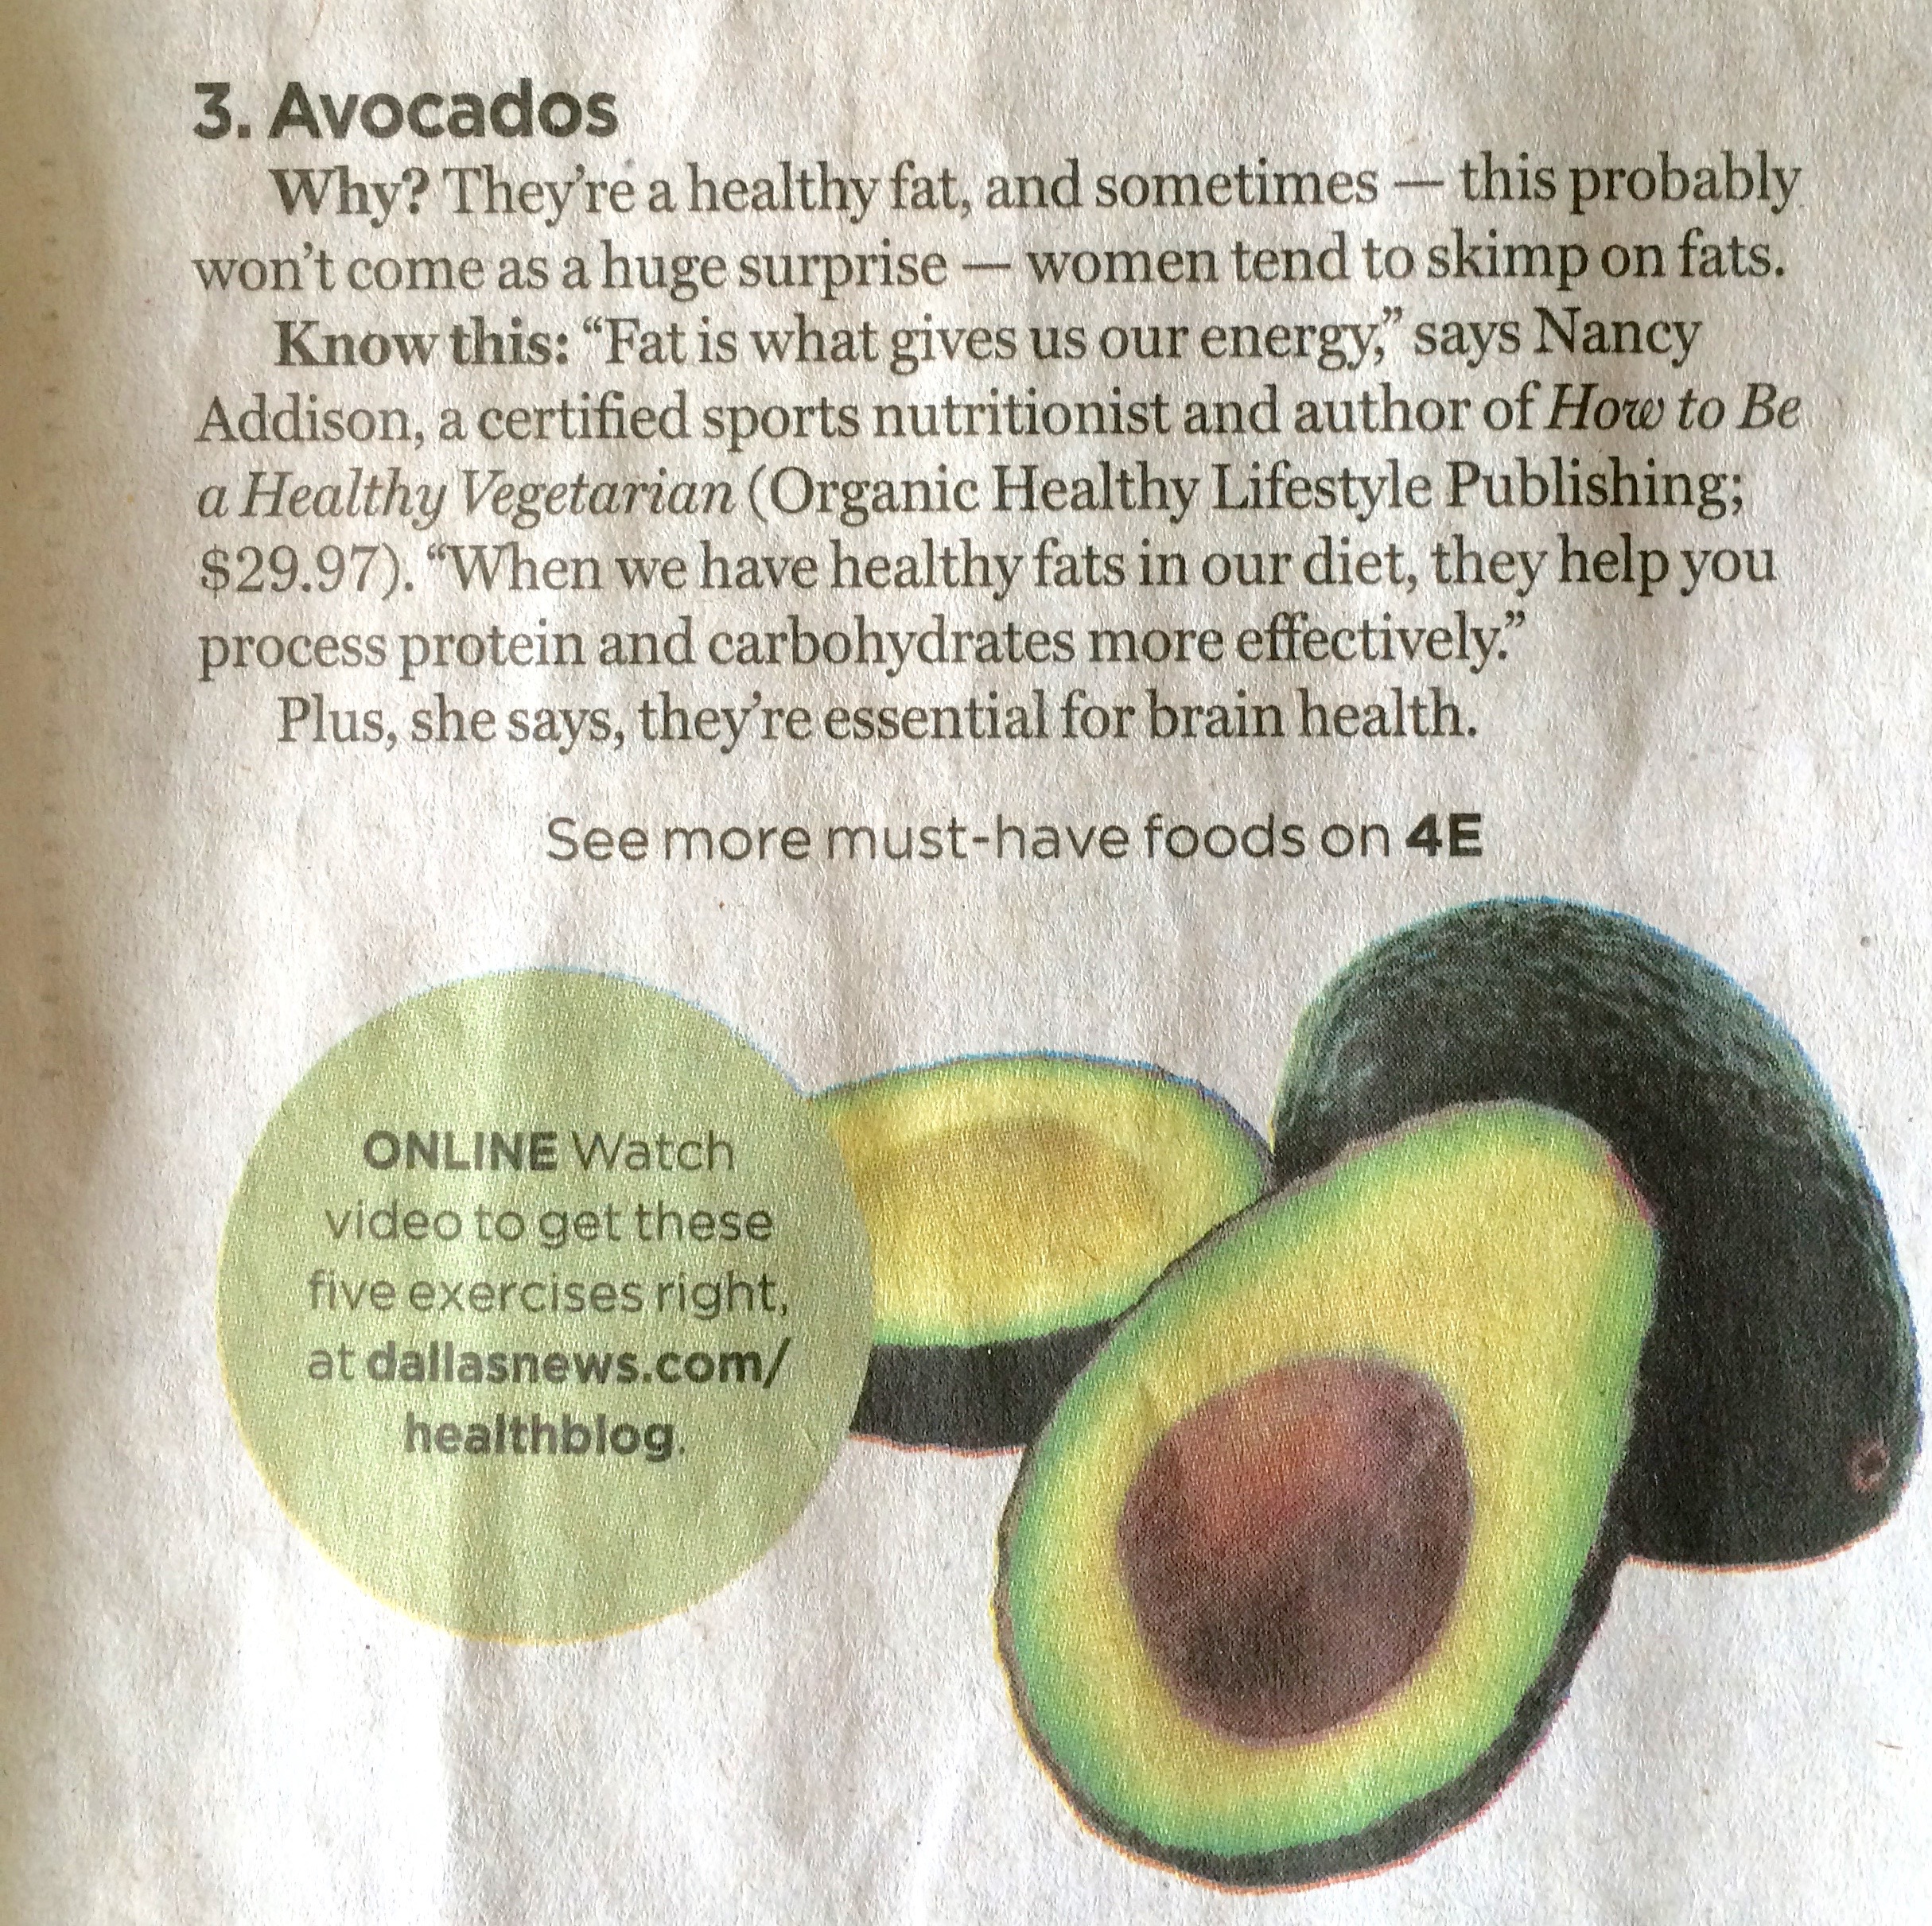 smart foods, wise moves in dallas morning news w nancy addison quoted on healthy fats